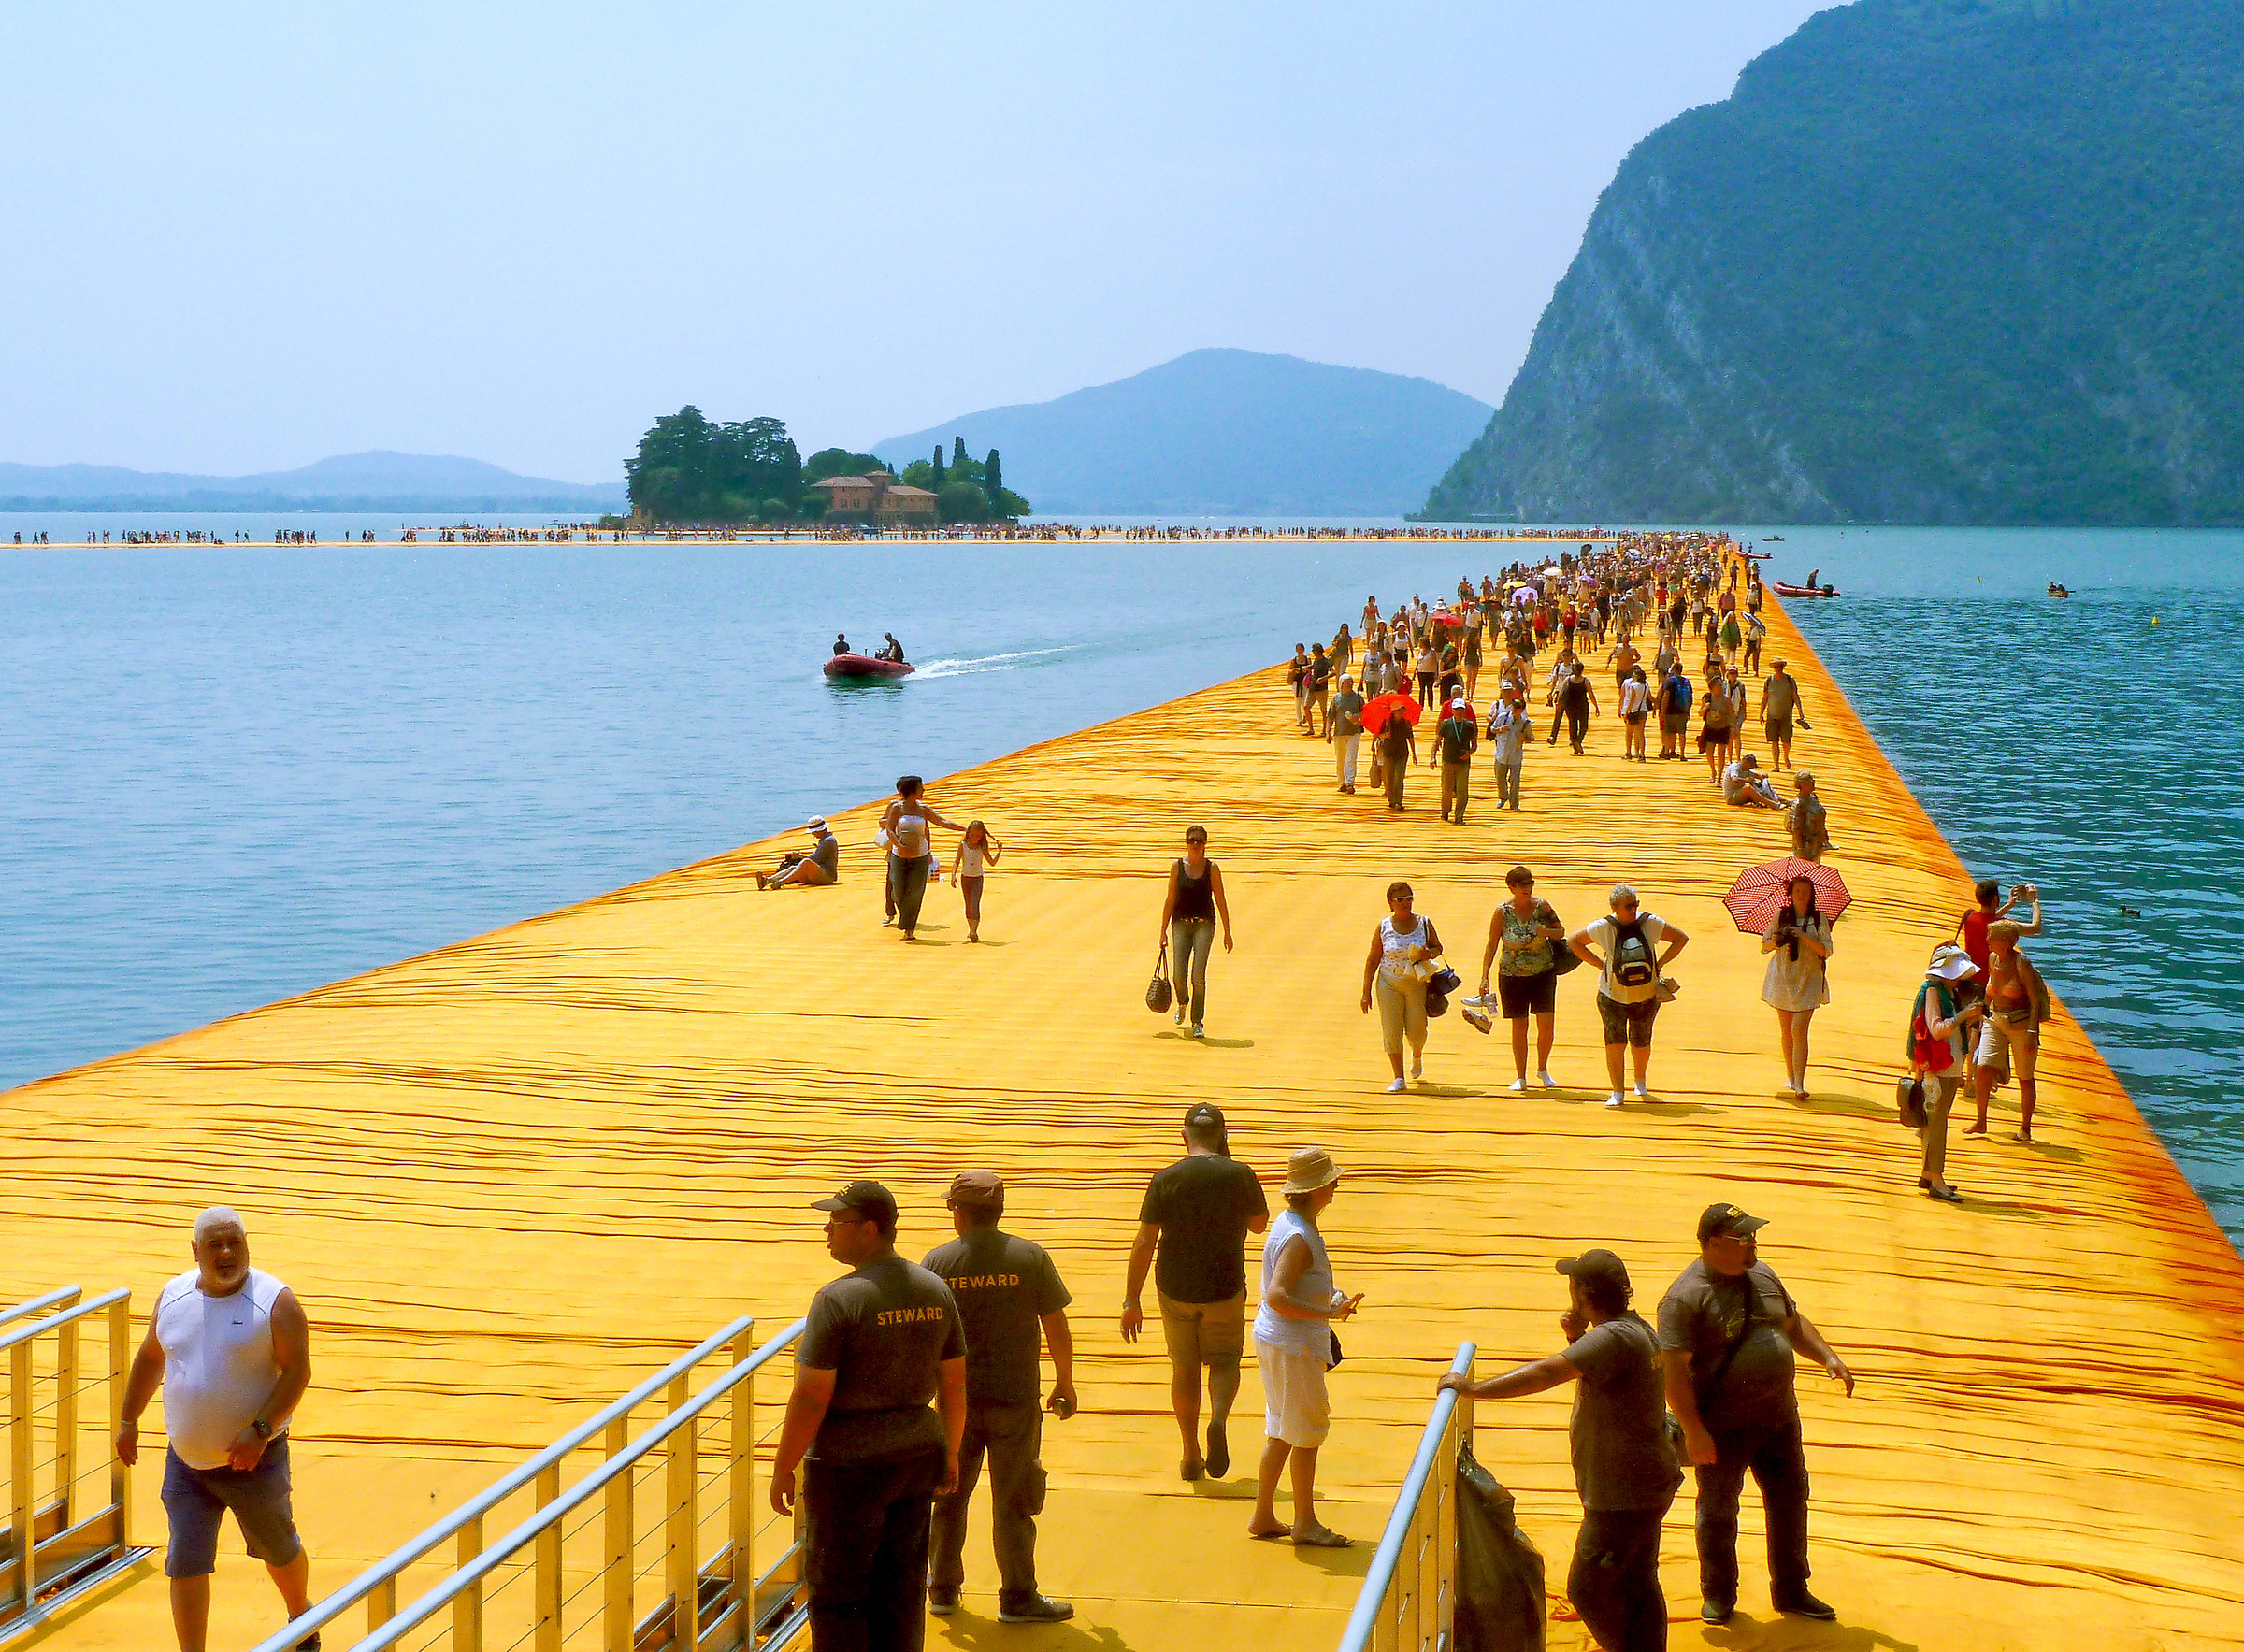 The Floating Piers June 30, 2016...